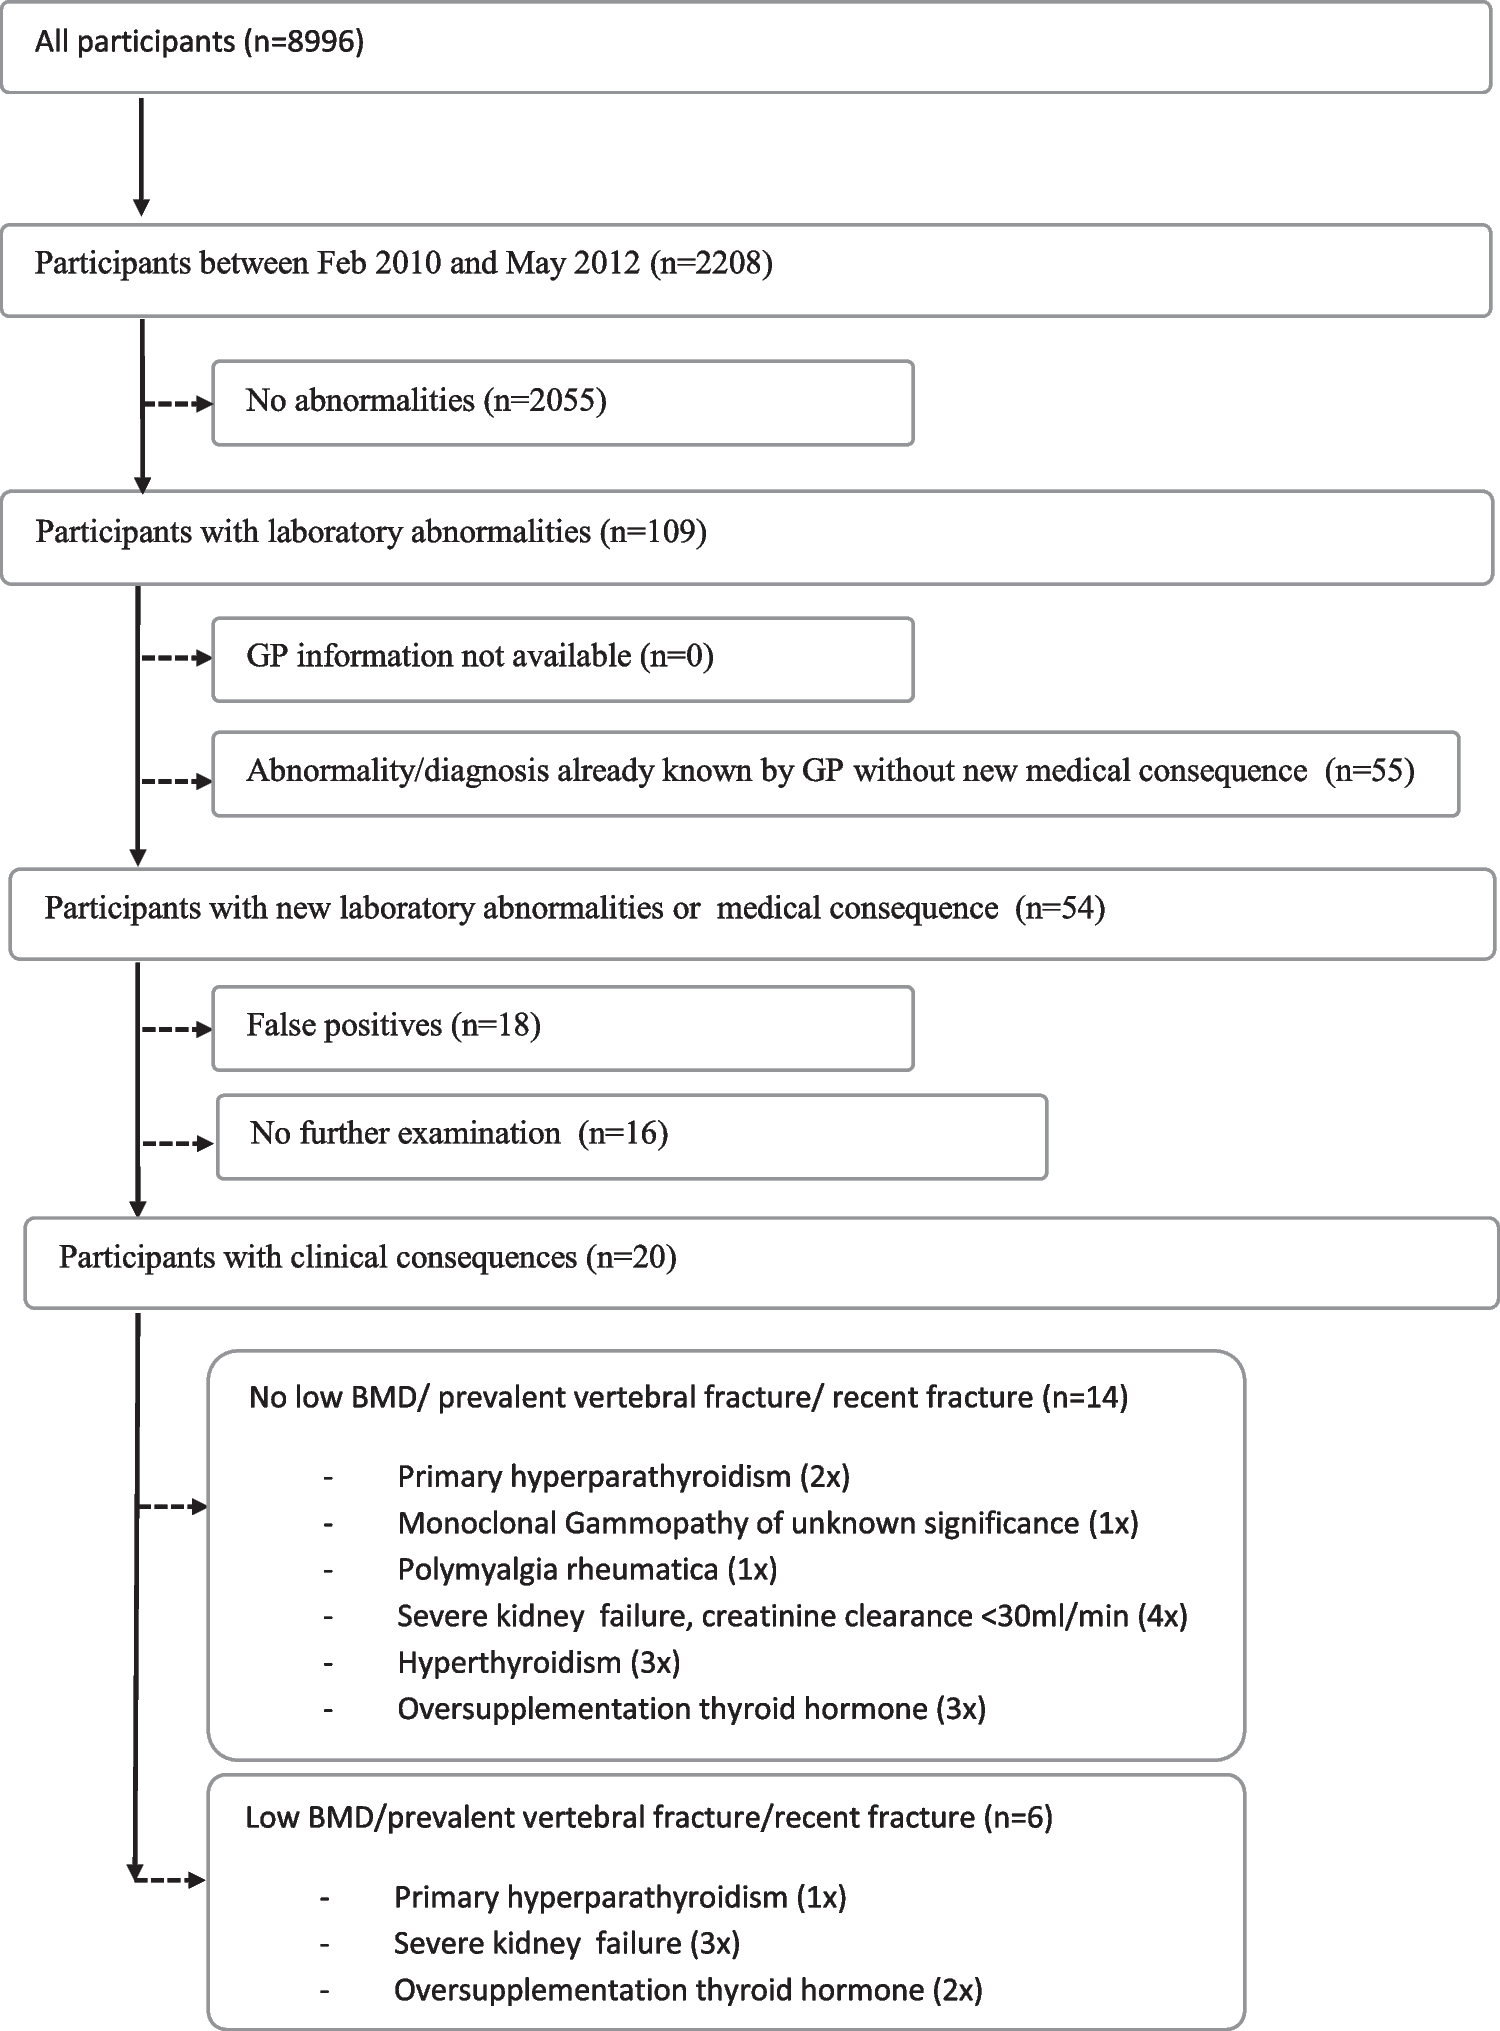 The yield of routine laboratory examination in osteoporosis evaluation in primary care